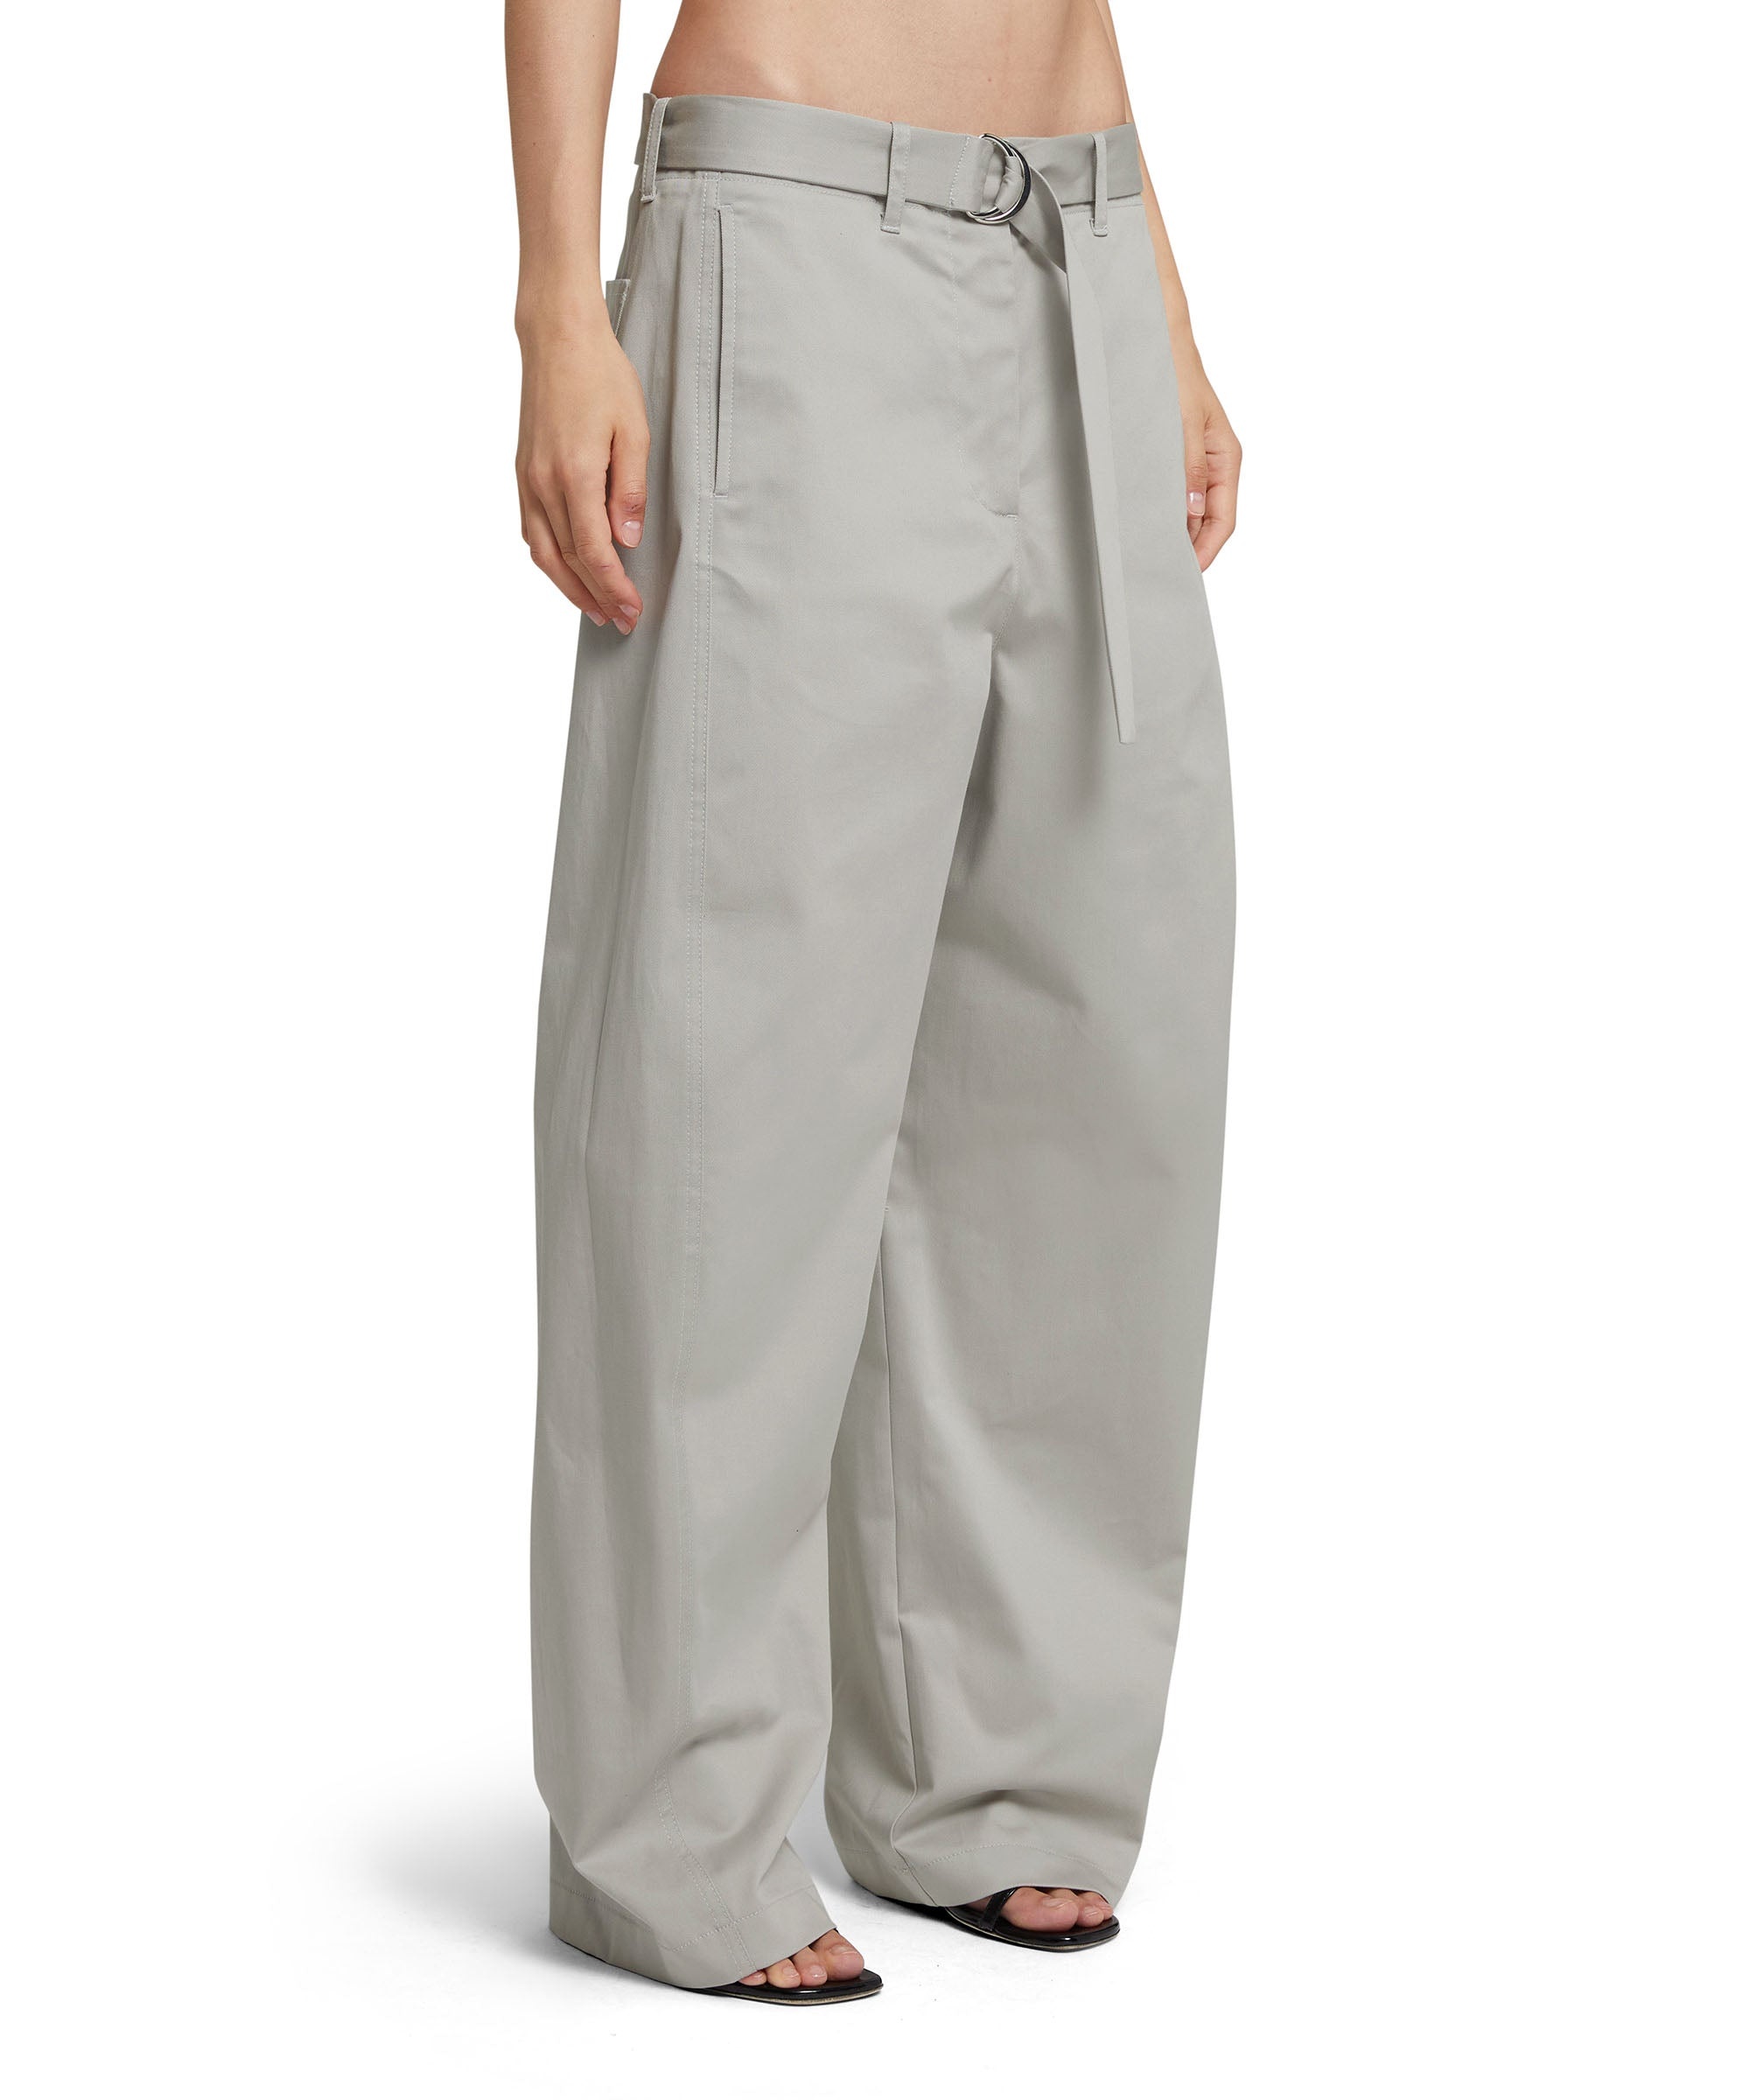 Stretch cotton gabardine pants with belted waist - 4